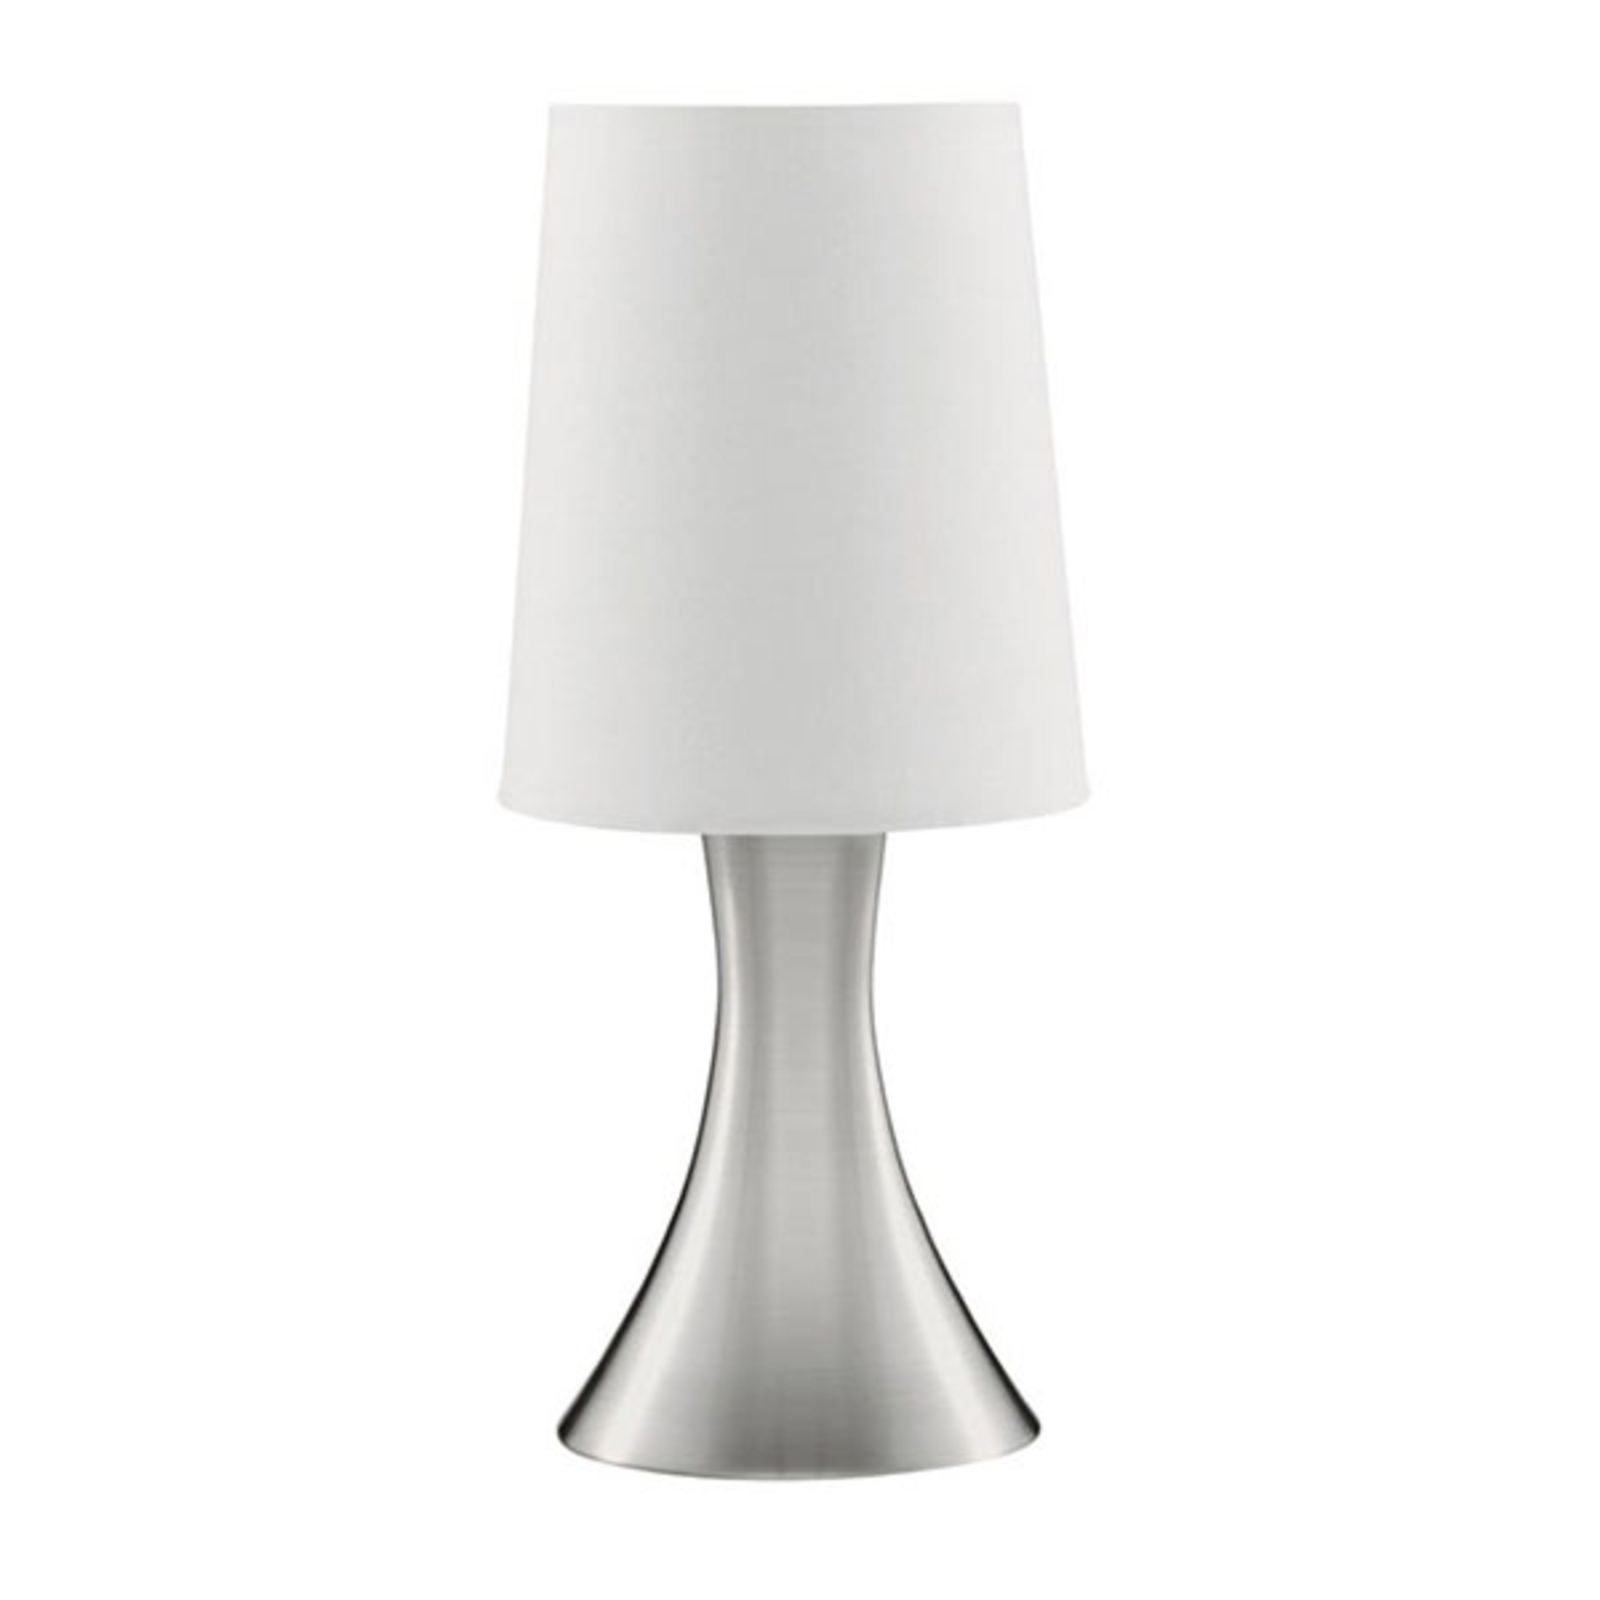 Touch 3922 table lamp with a dimmer